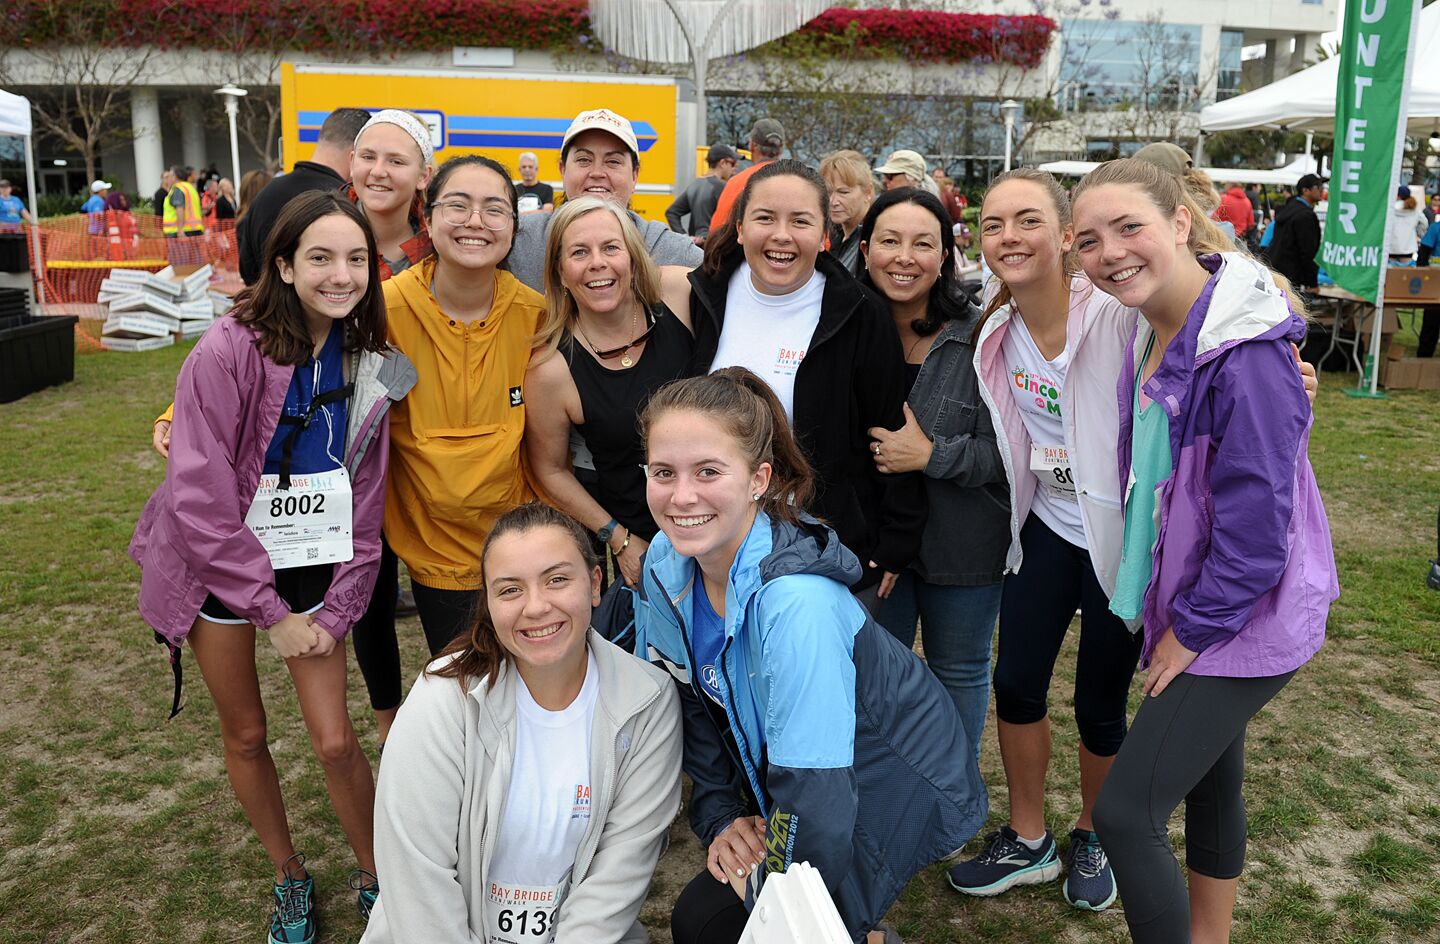 Dedicated participants didn't let a little rain get in the way of the Navy Bay Bridge Run/Walk on Sunday, May 19, 2019.